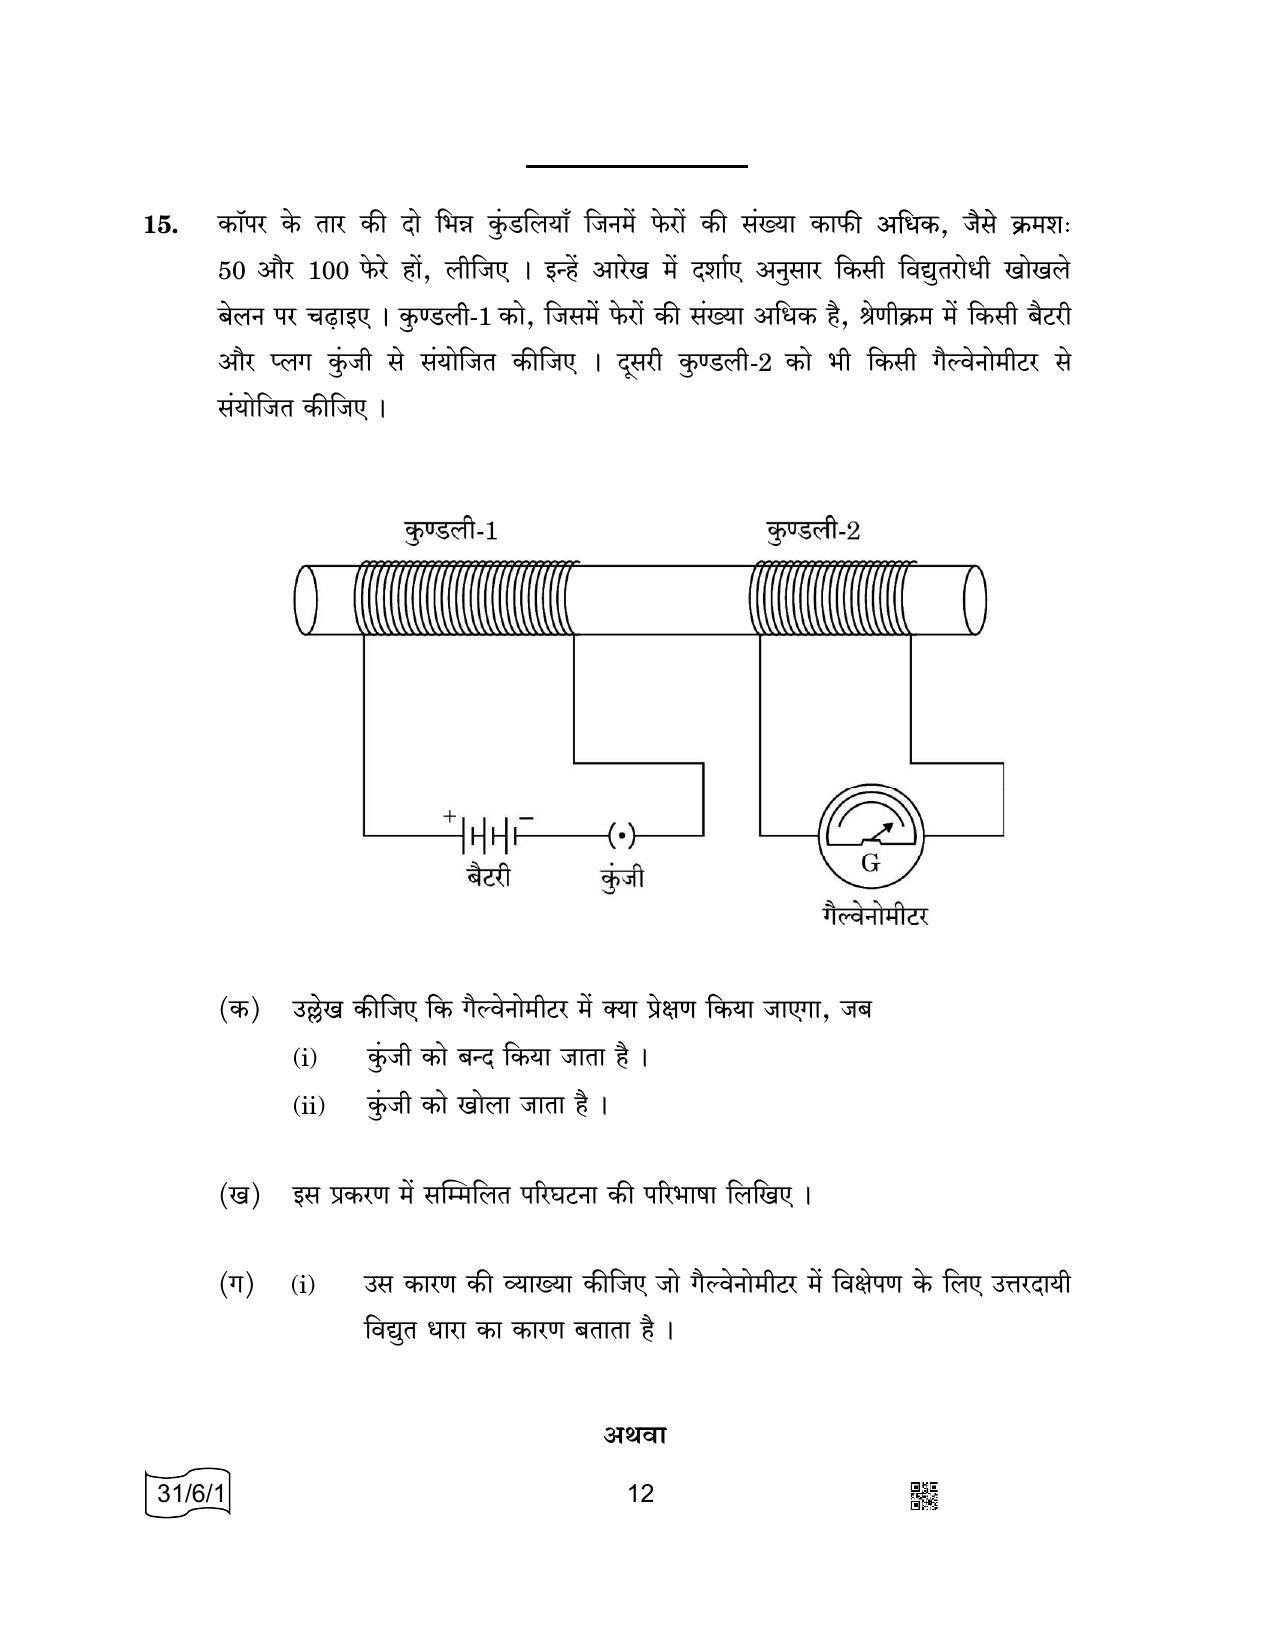 CBSE Class 10 31-6-1 SCIENCE 2022 Compartment Question Paper - Page 12